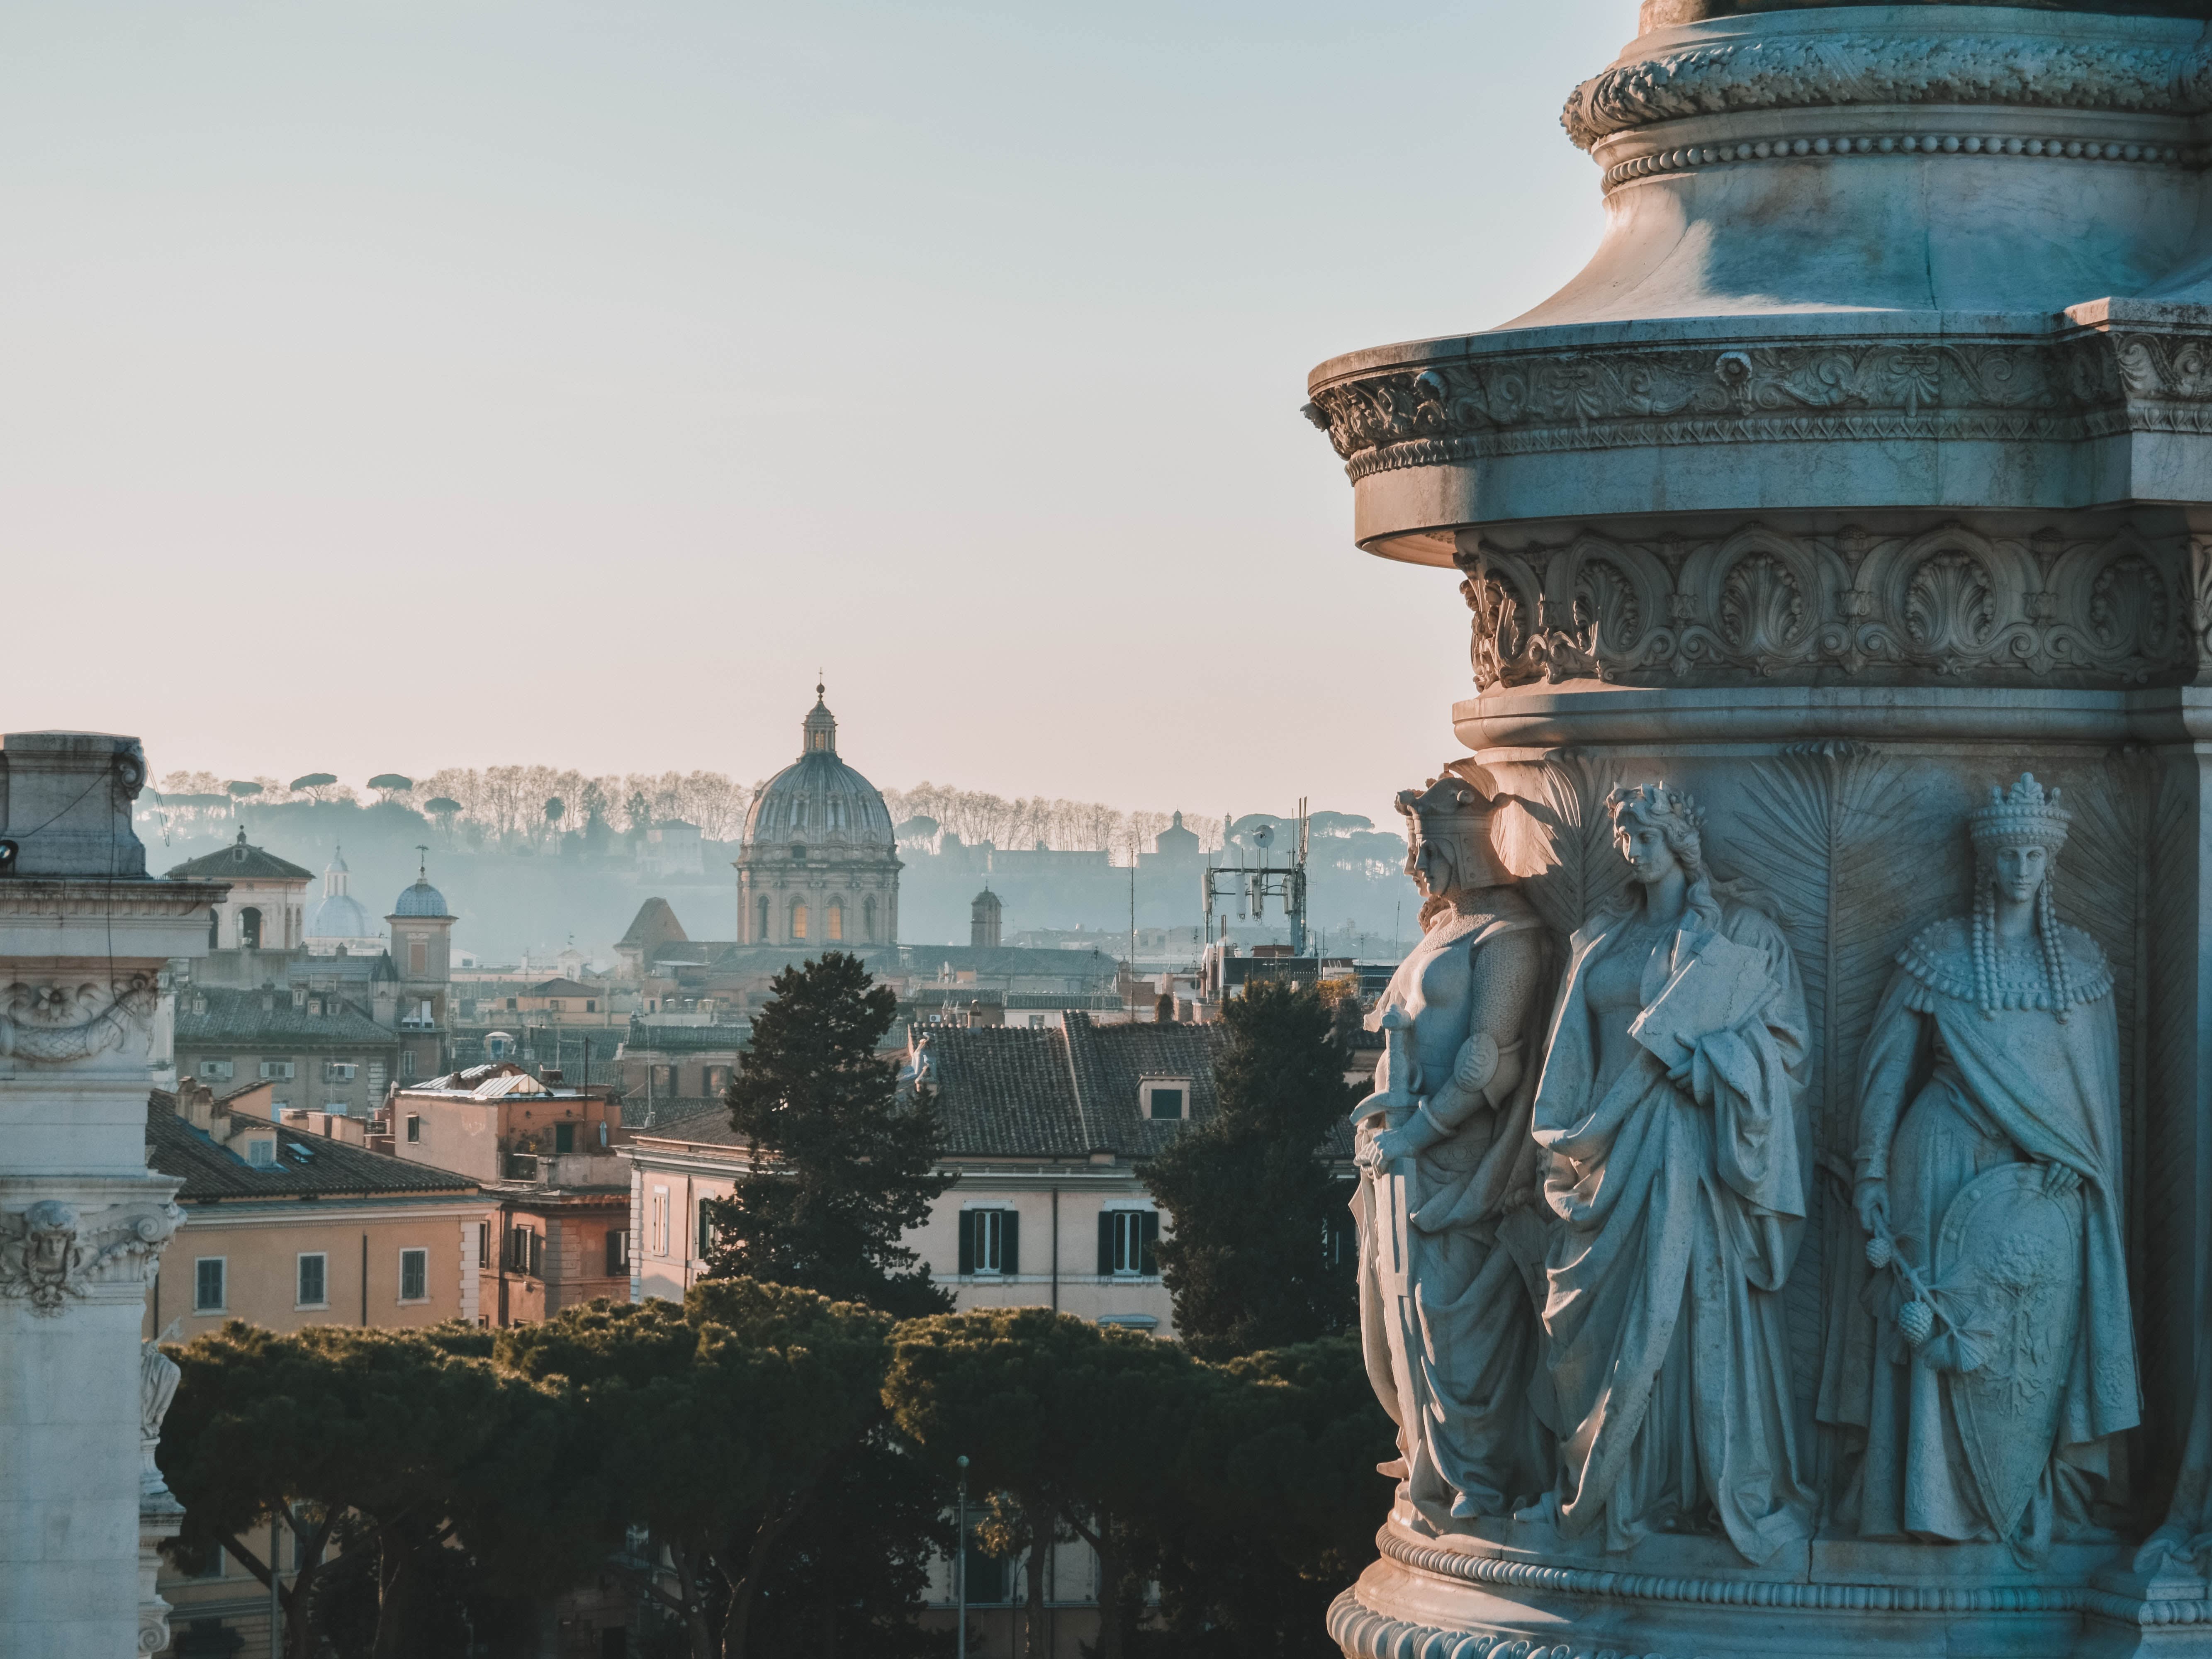 a picture of rome view and statues